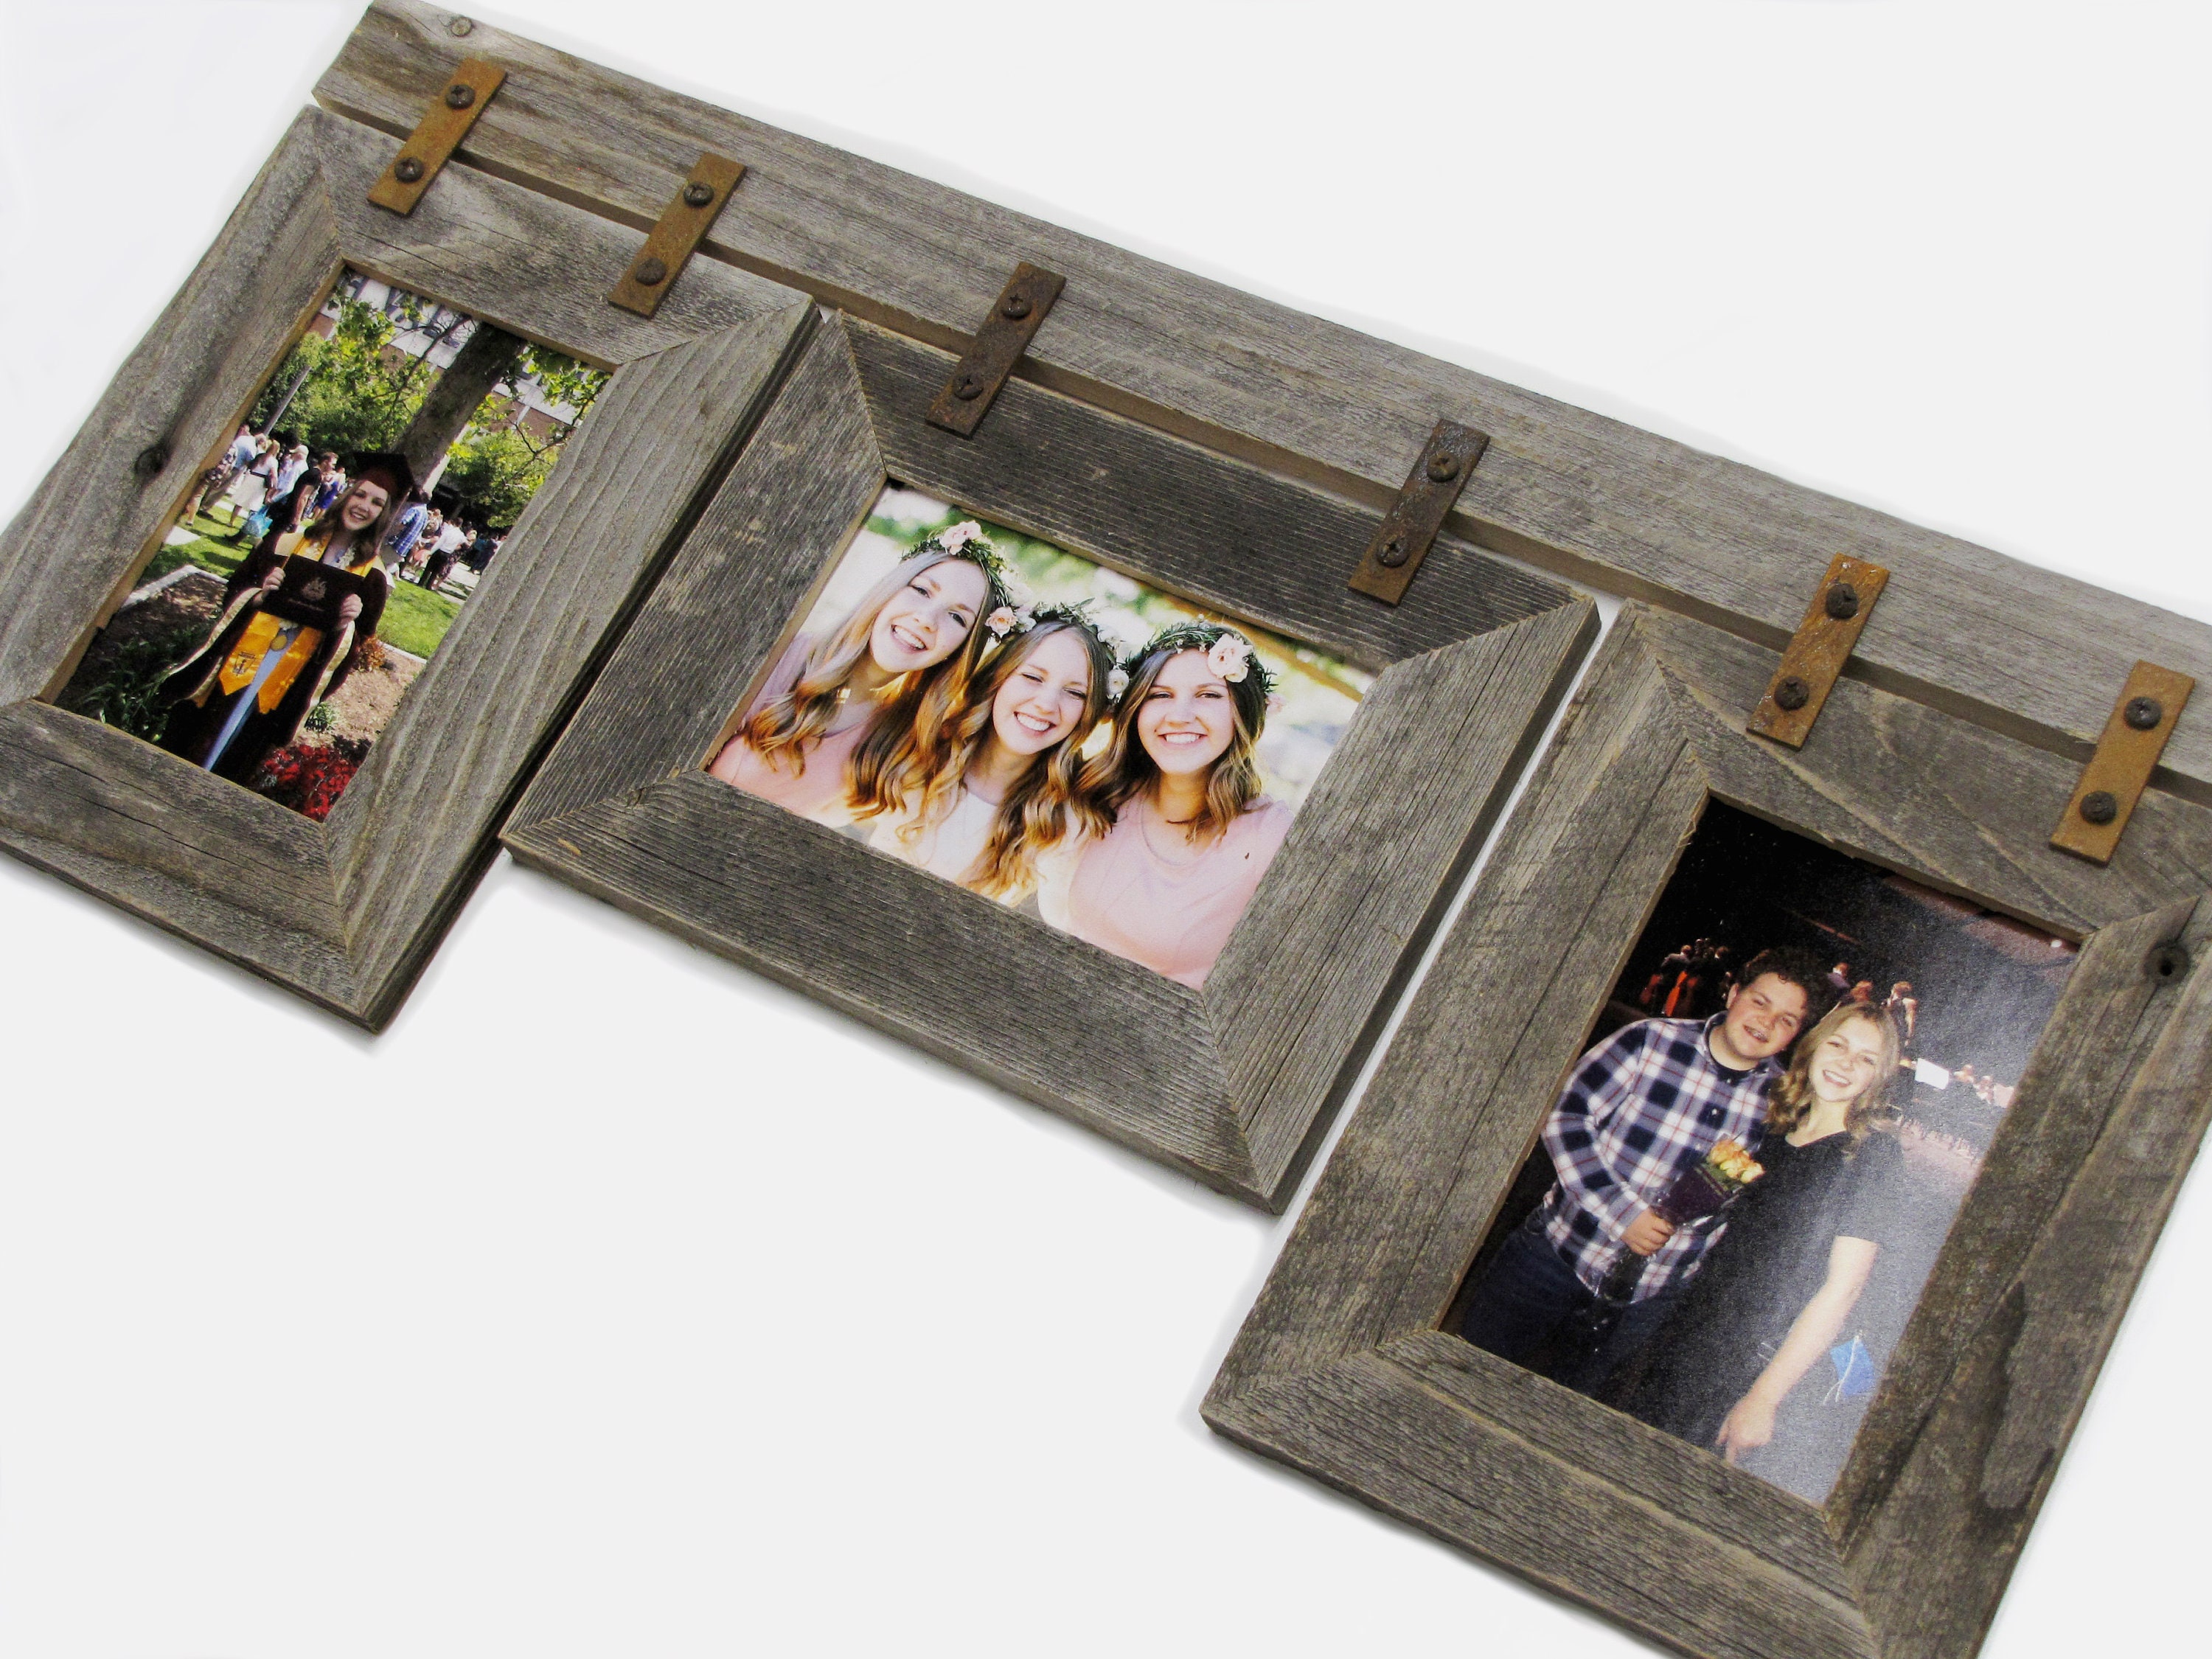 Duo Collage Frame - Barnwood, 4x6  Display 2 Photos in 1 Picture Frame